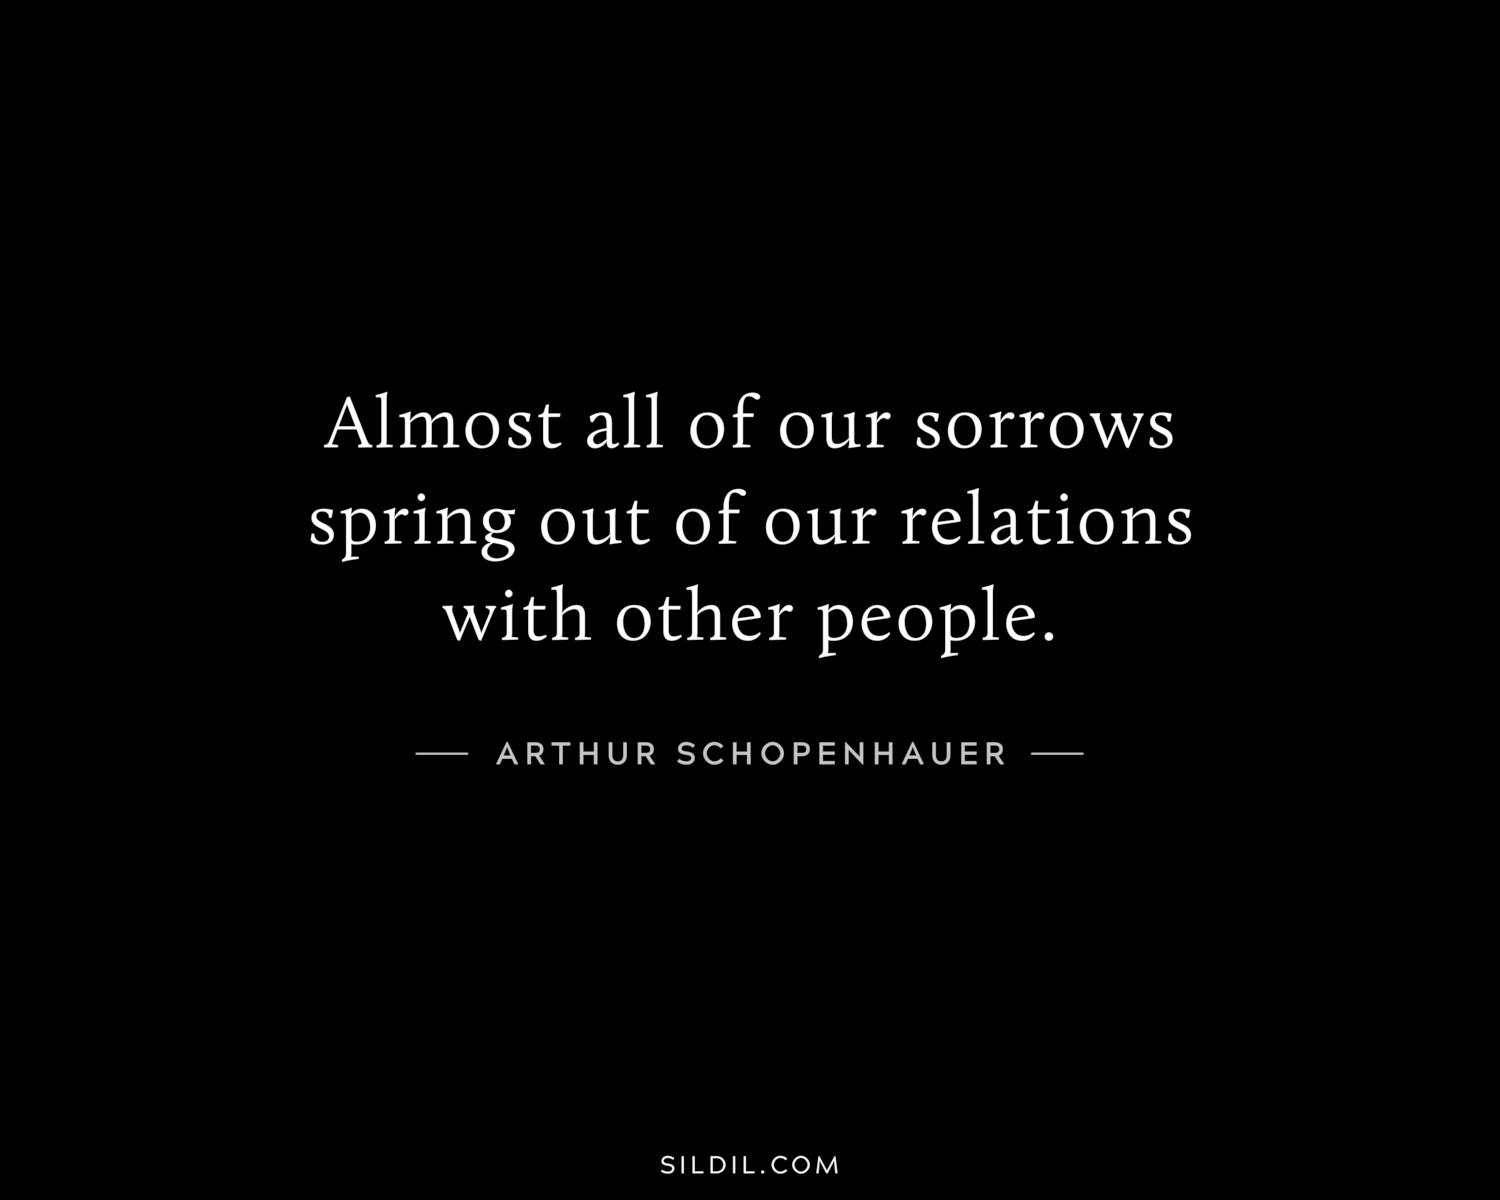 Almost all of our sorrows spring out of our relations with other people.